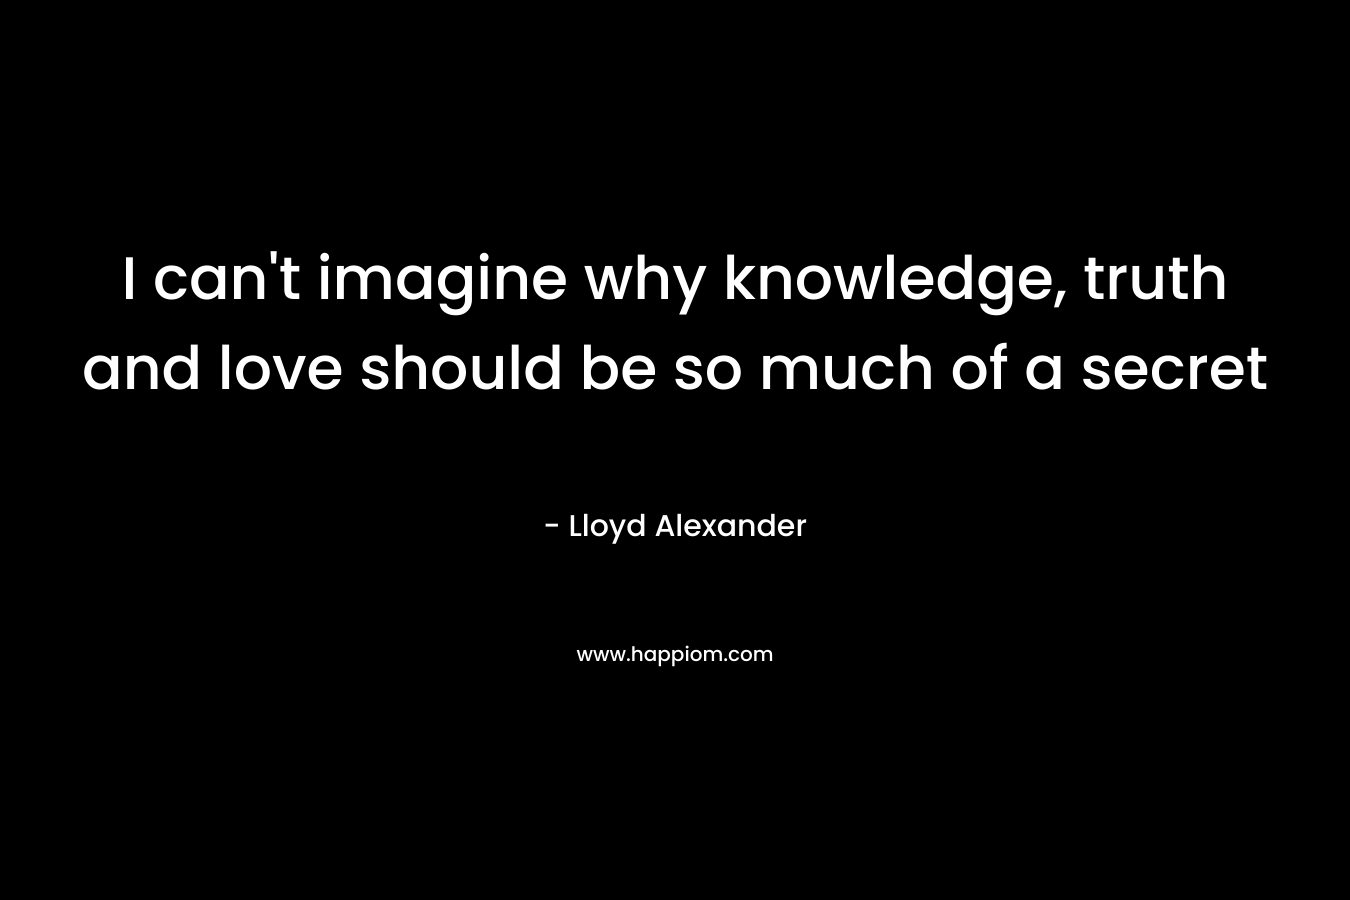 I can't imagine why knowledge, truth and love should be so much of a secret